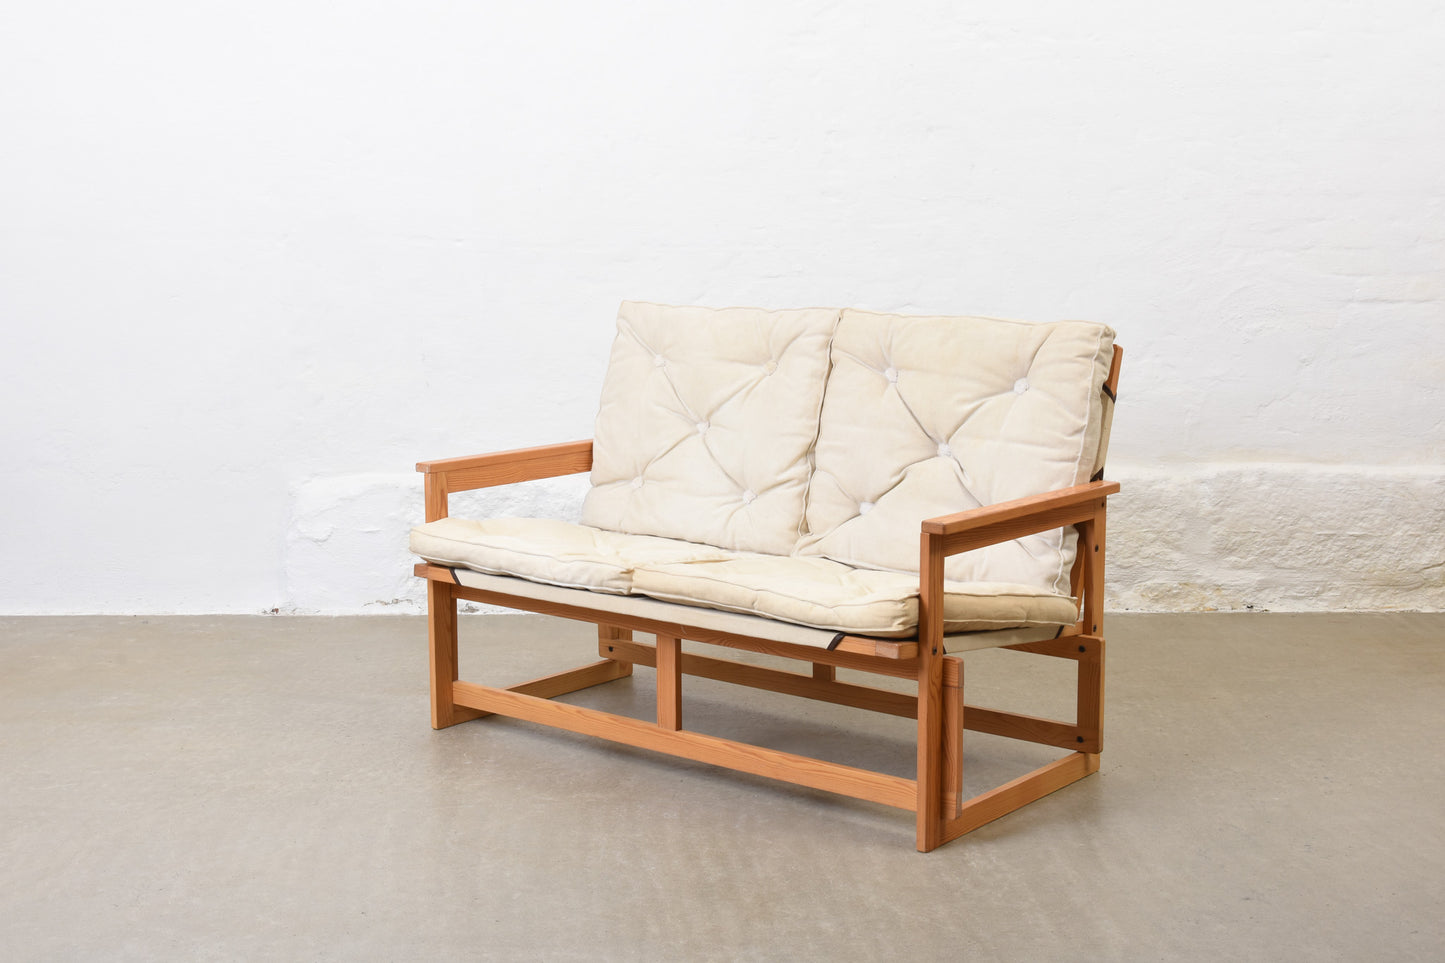 1970s pine and canvas sofa by Brio Ferie